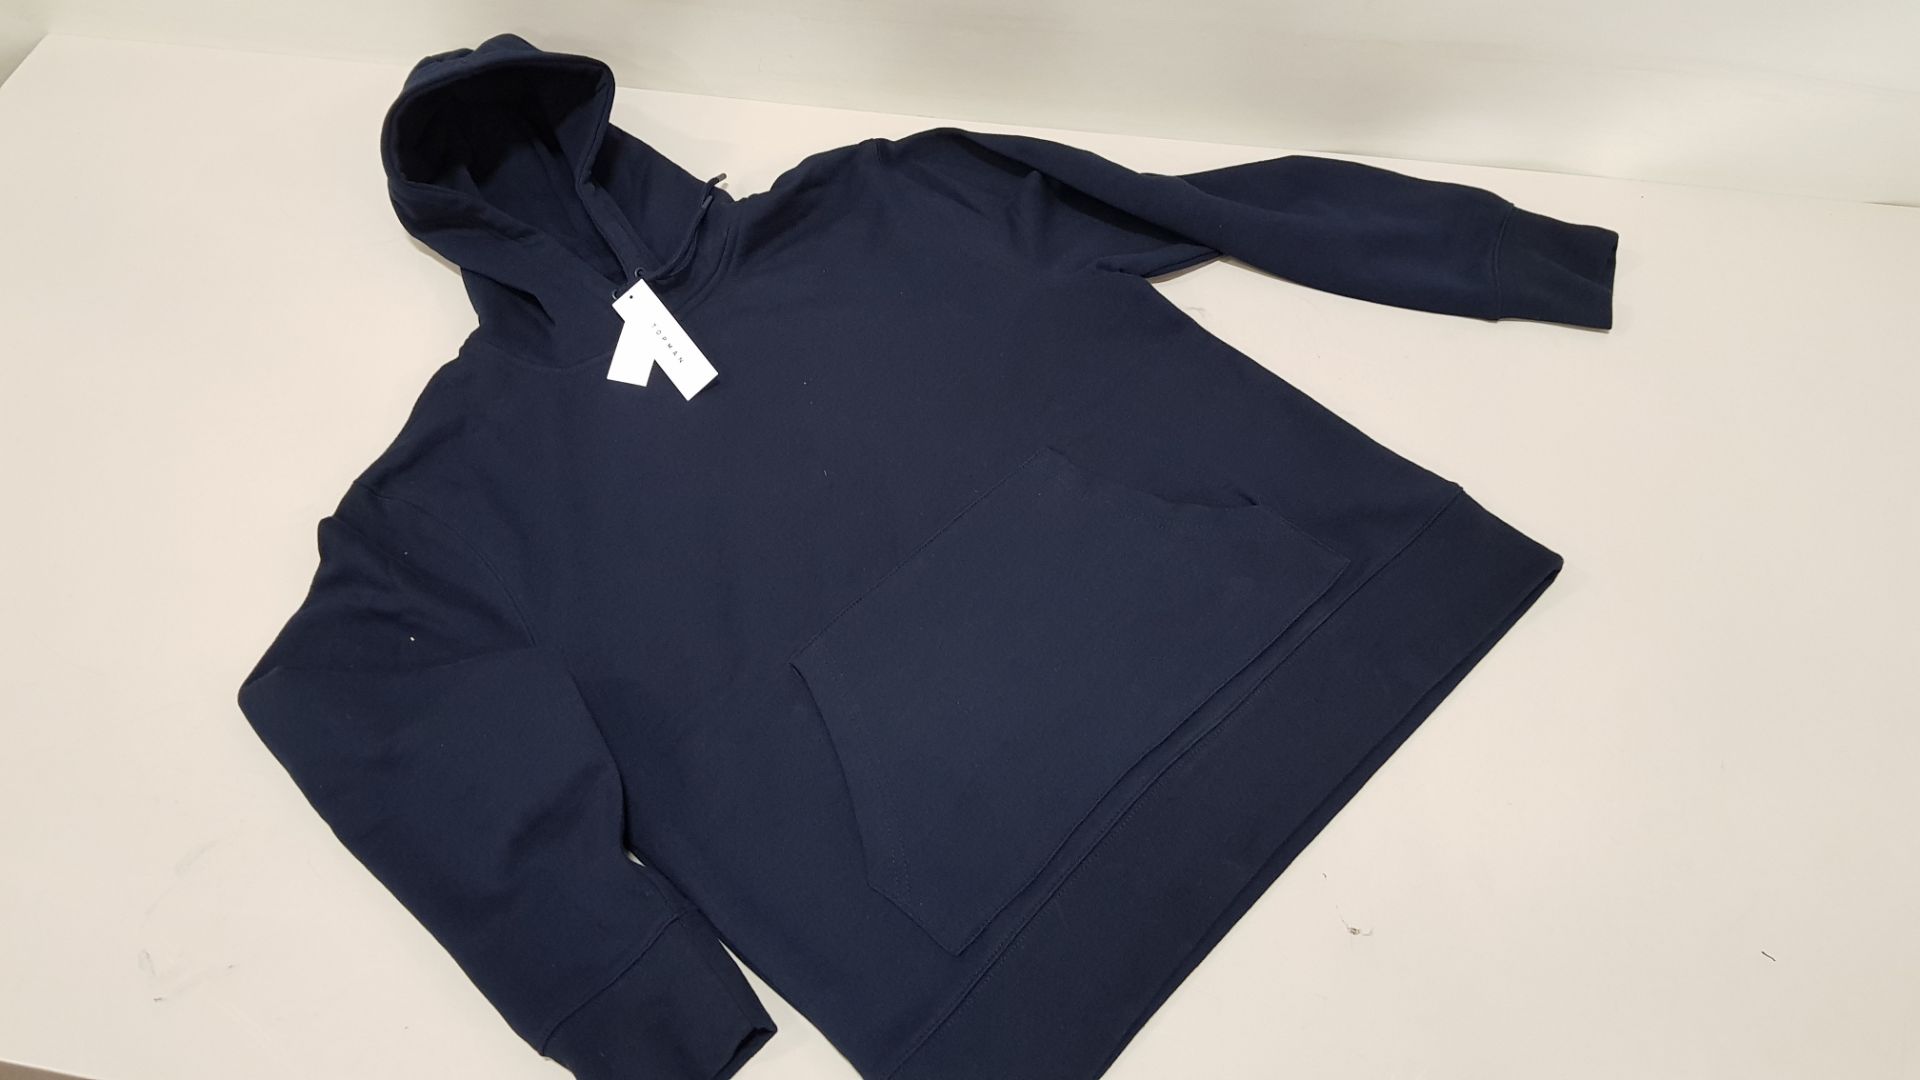 11 X BRAND NEW BAGGED TOPMAN NAVY HOODIE (7 X SIZE UK XS AND 4 X UK M) RRP £24.99 (TOTAL £274.89)